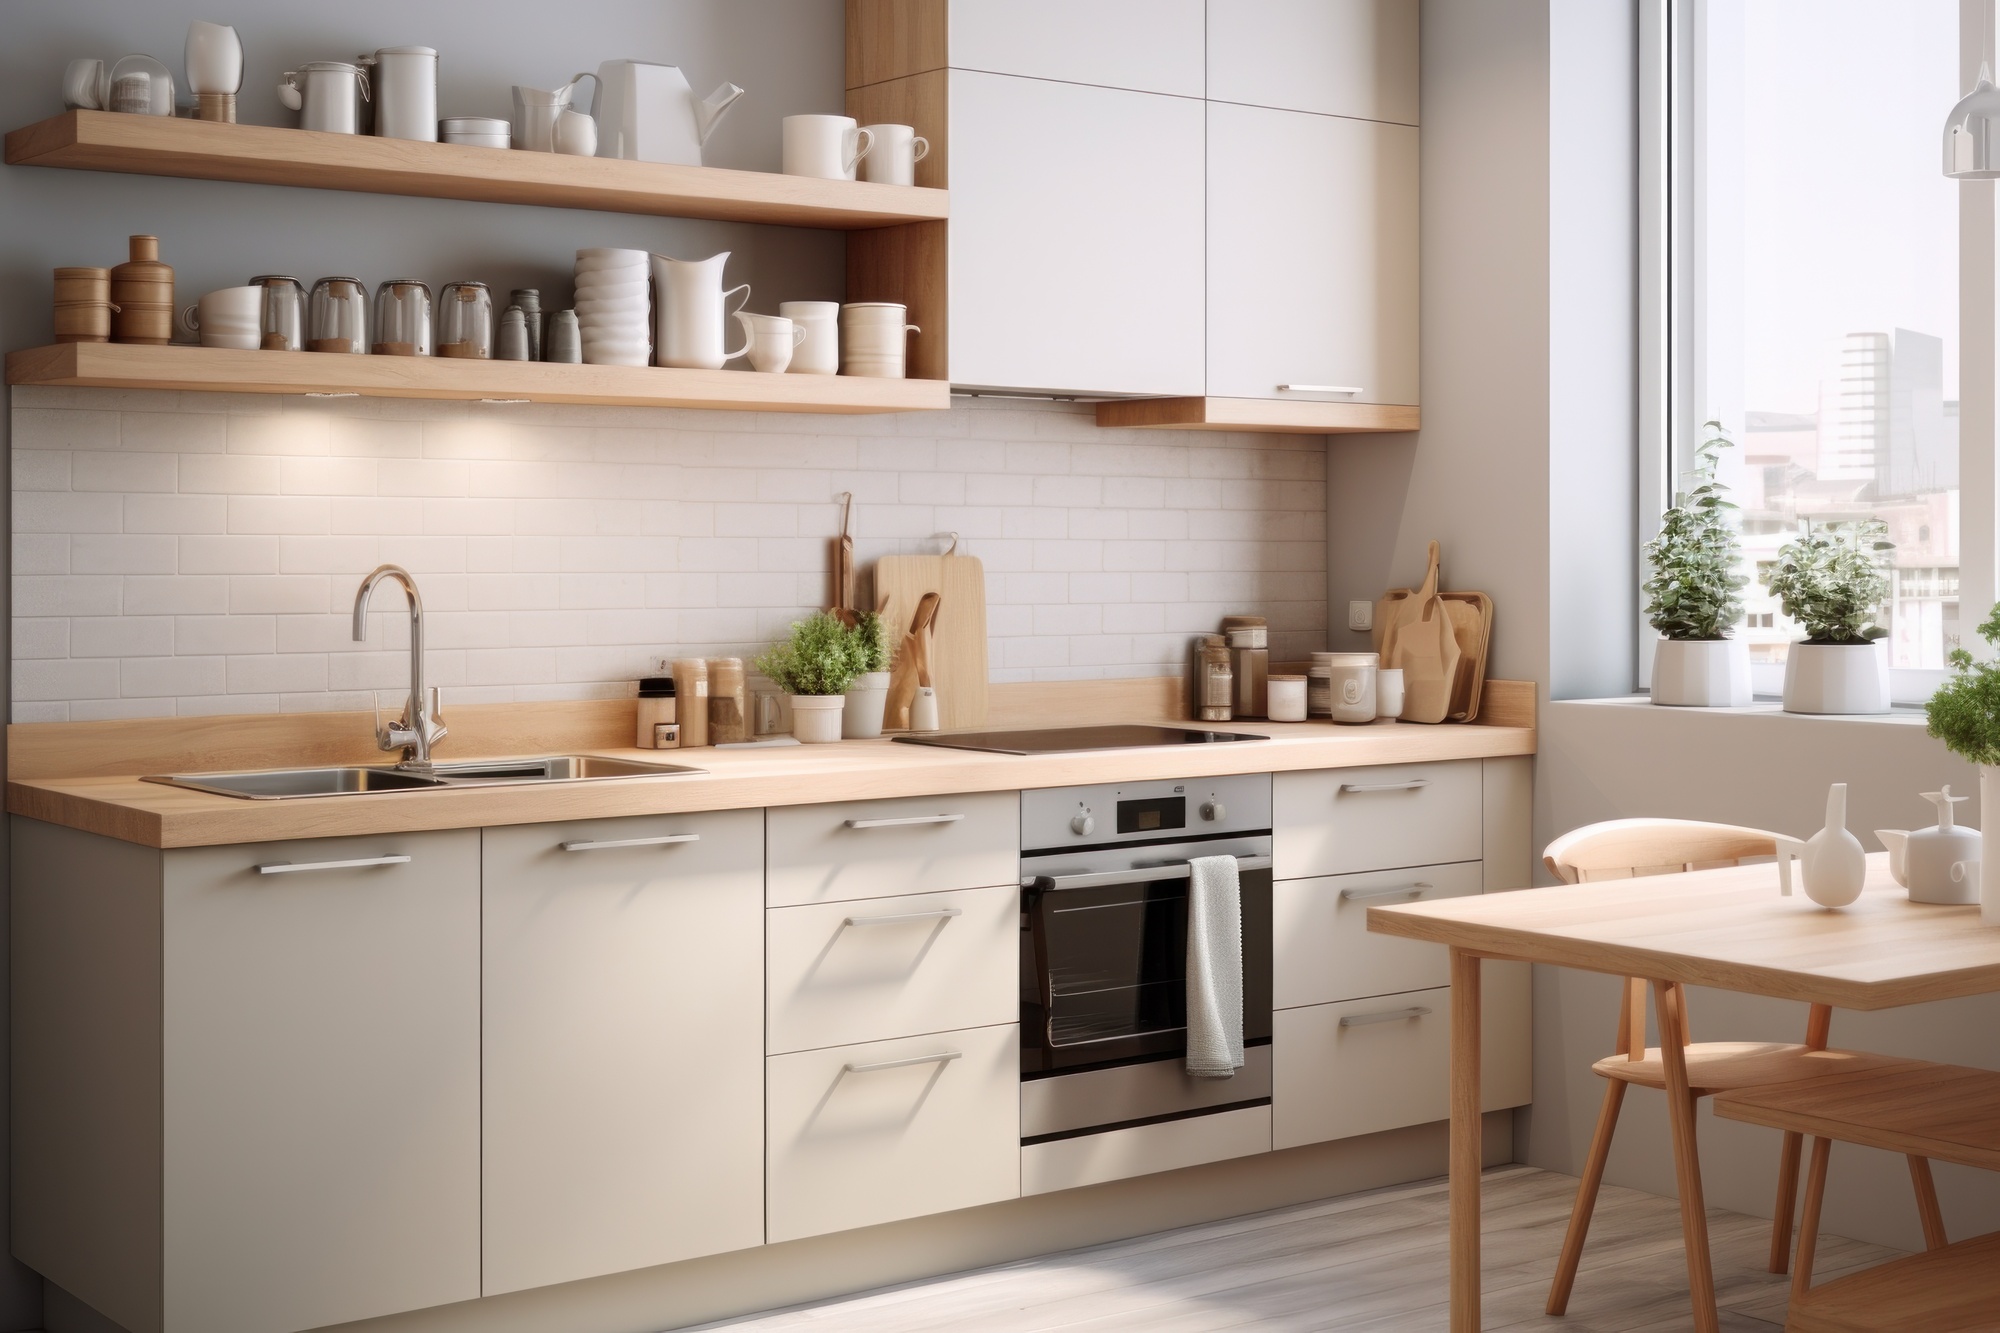 Small Kitchen, Big Impact: Design Tips For Limited Spaces